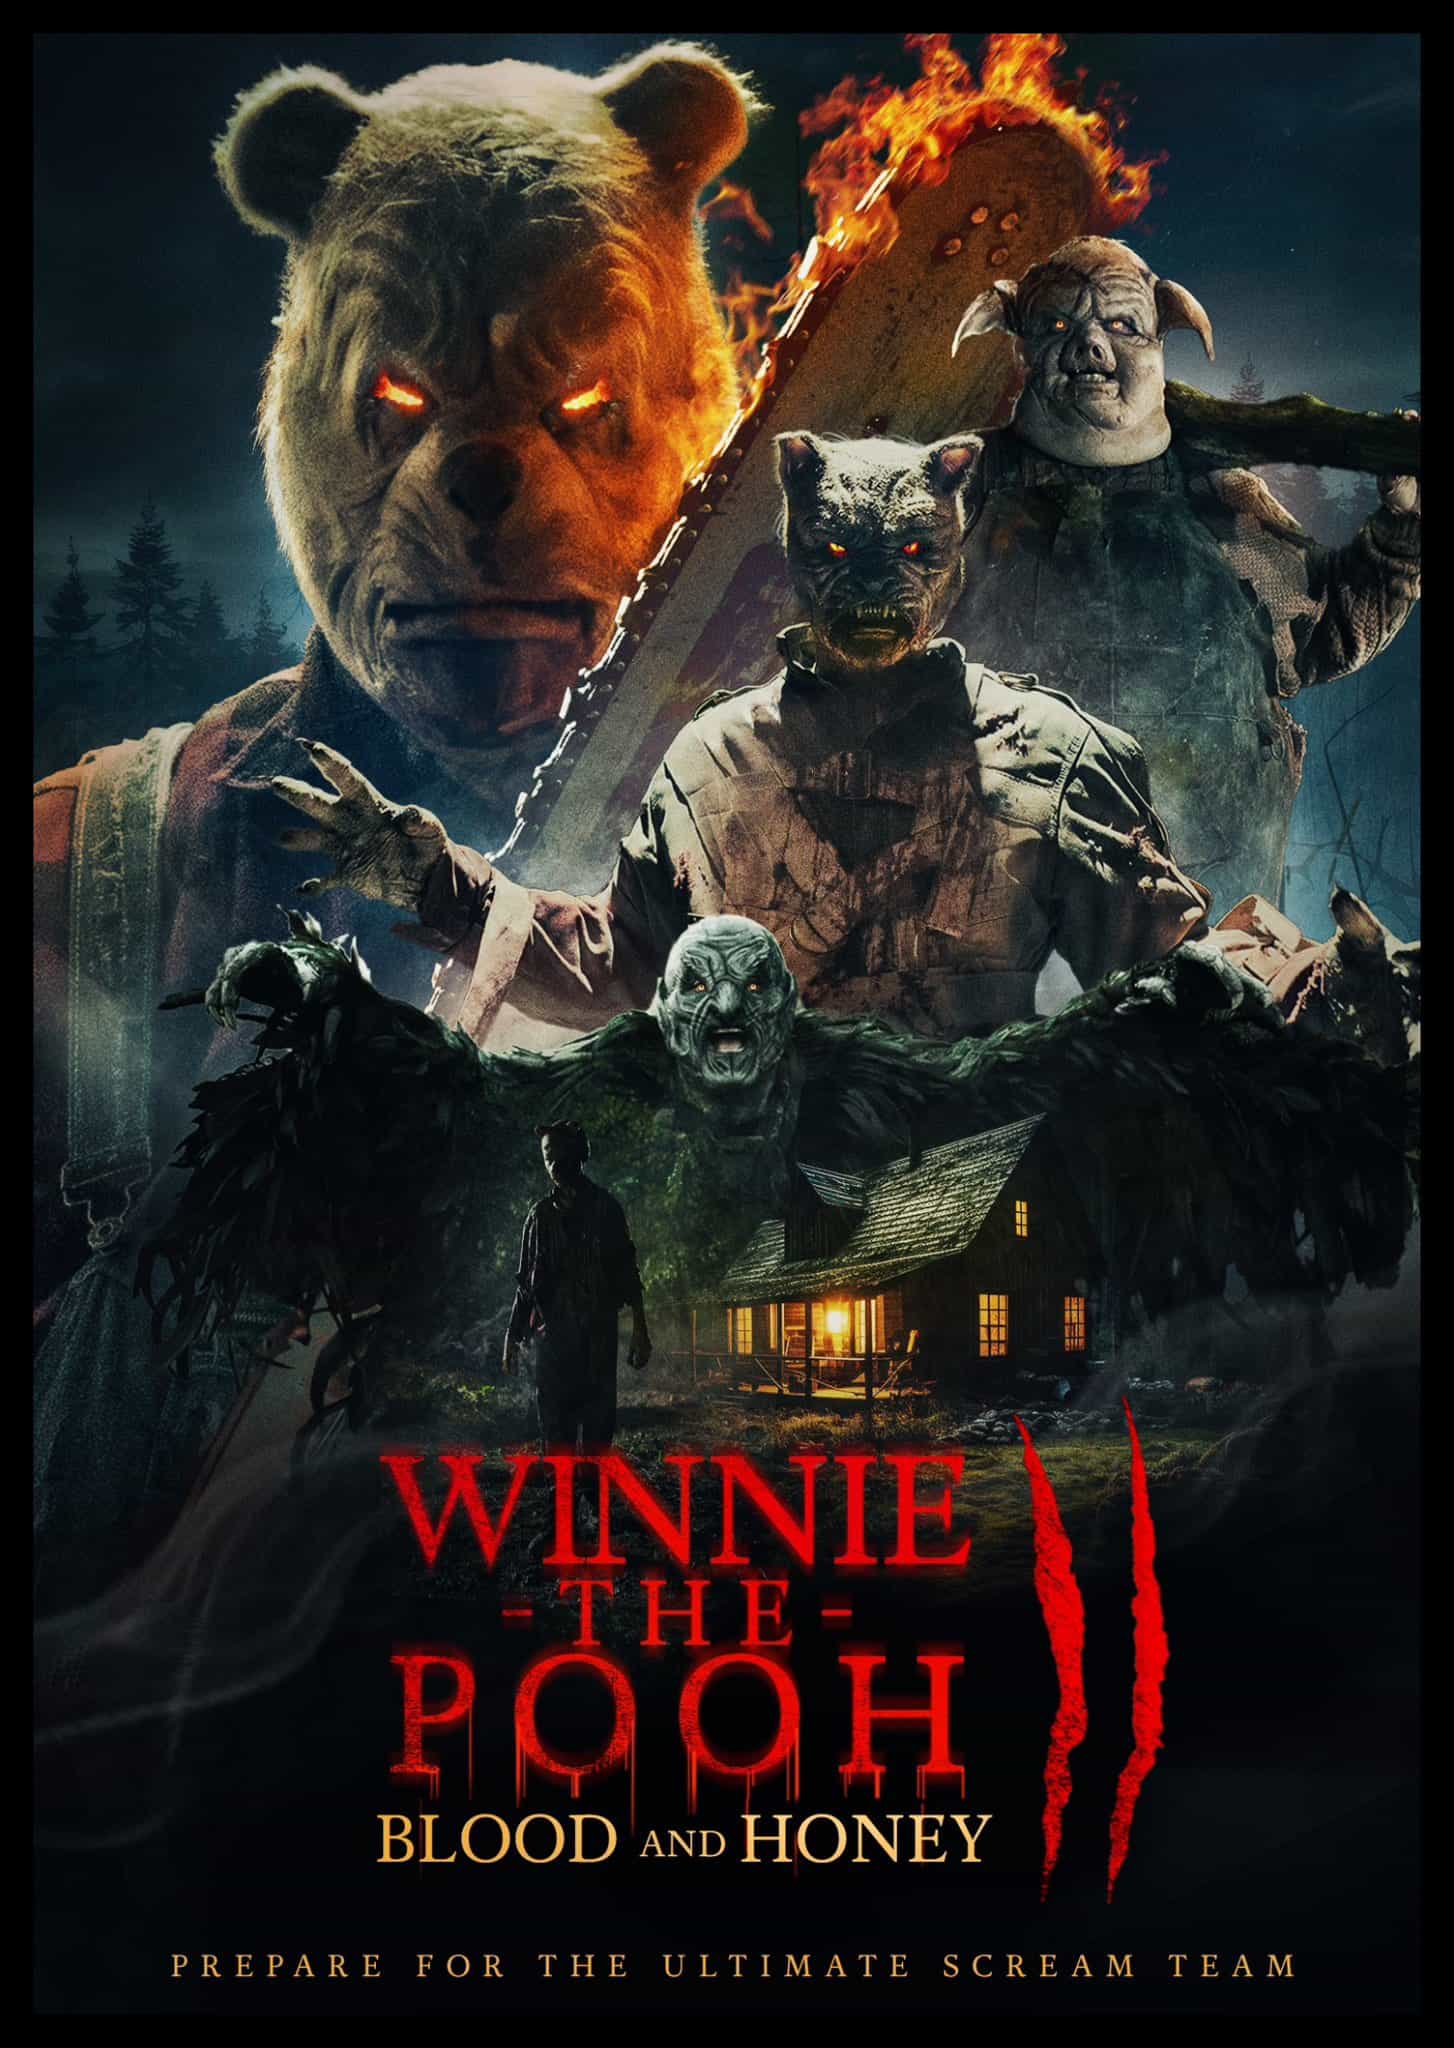 Winnie-The-Pooh: Blood and Honey 2